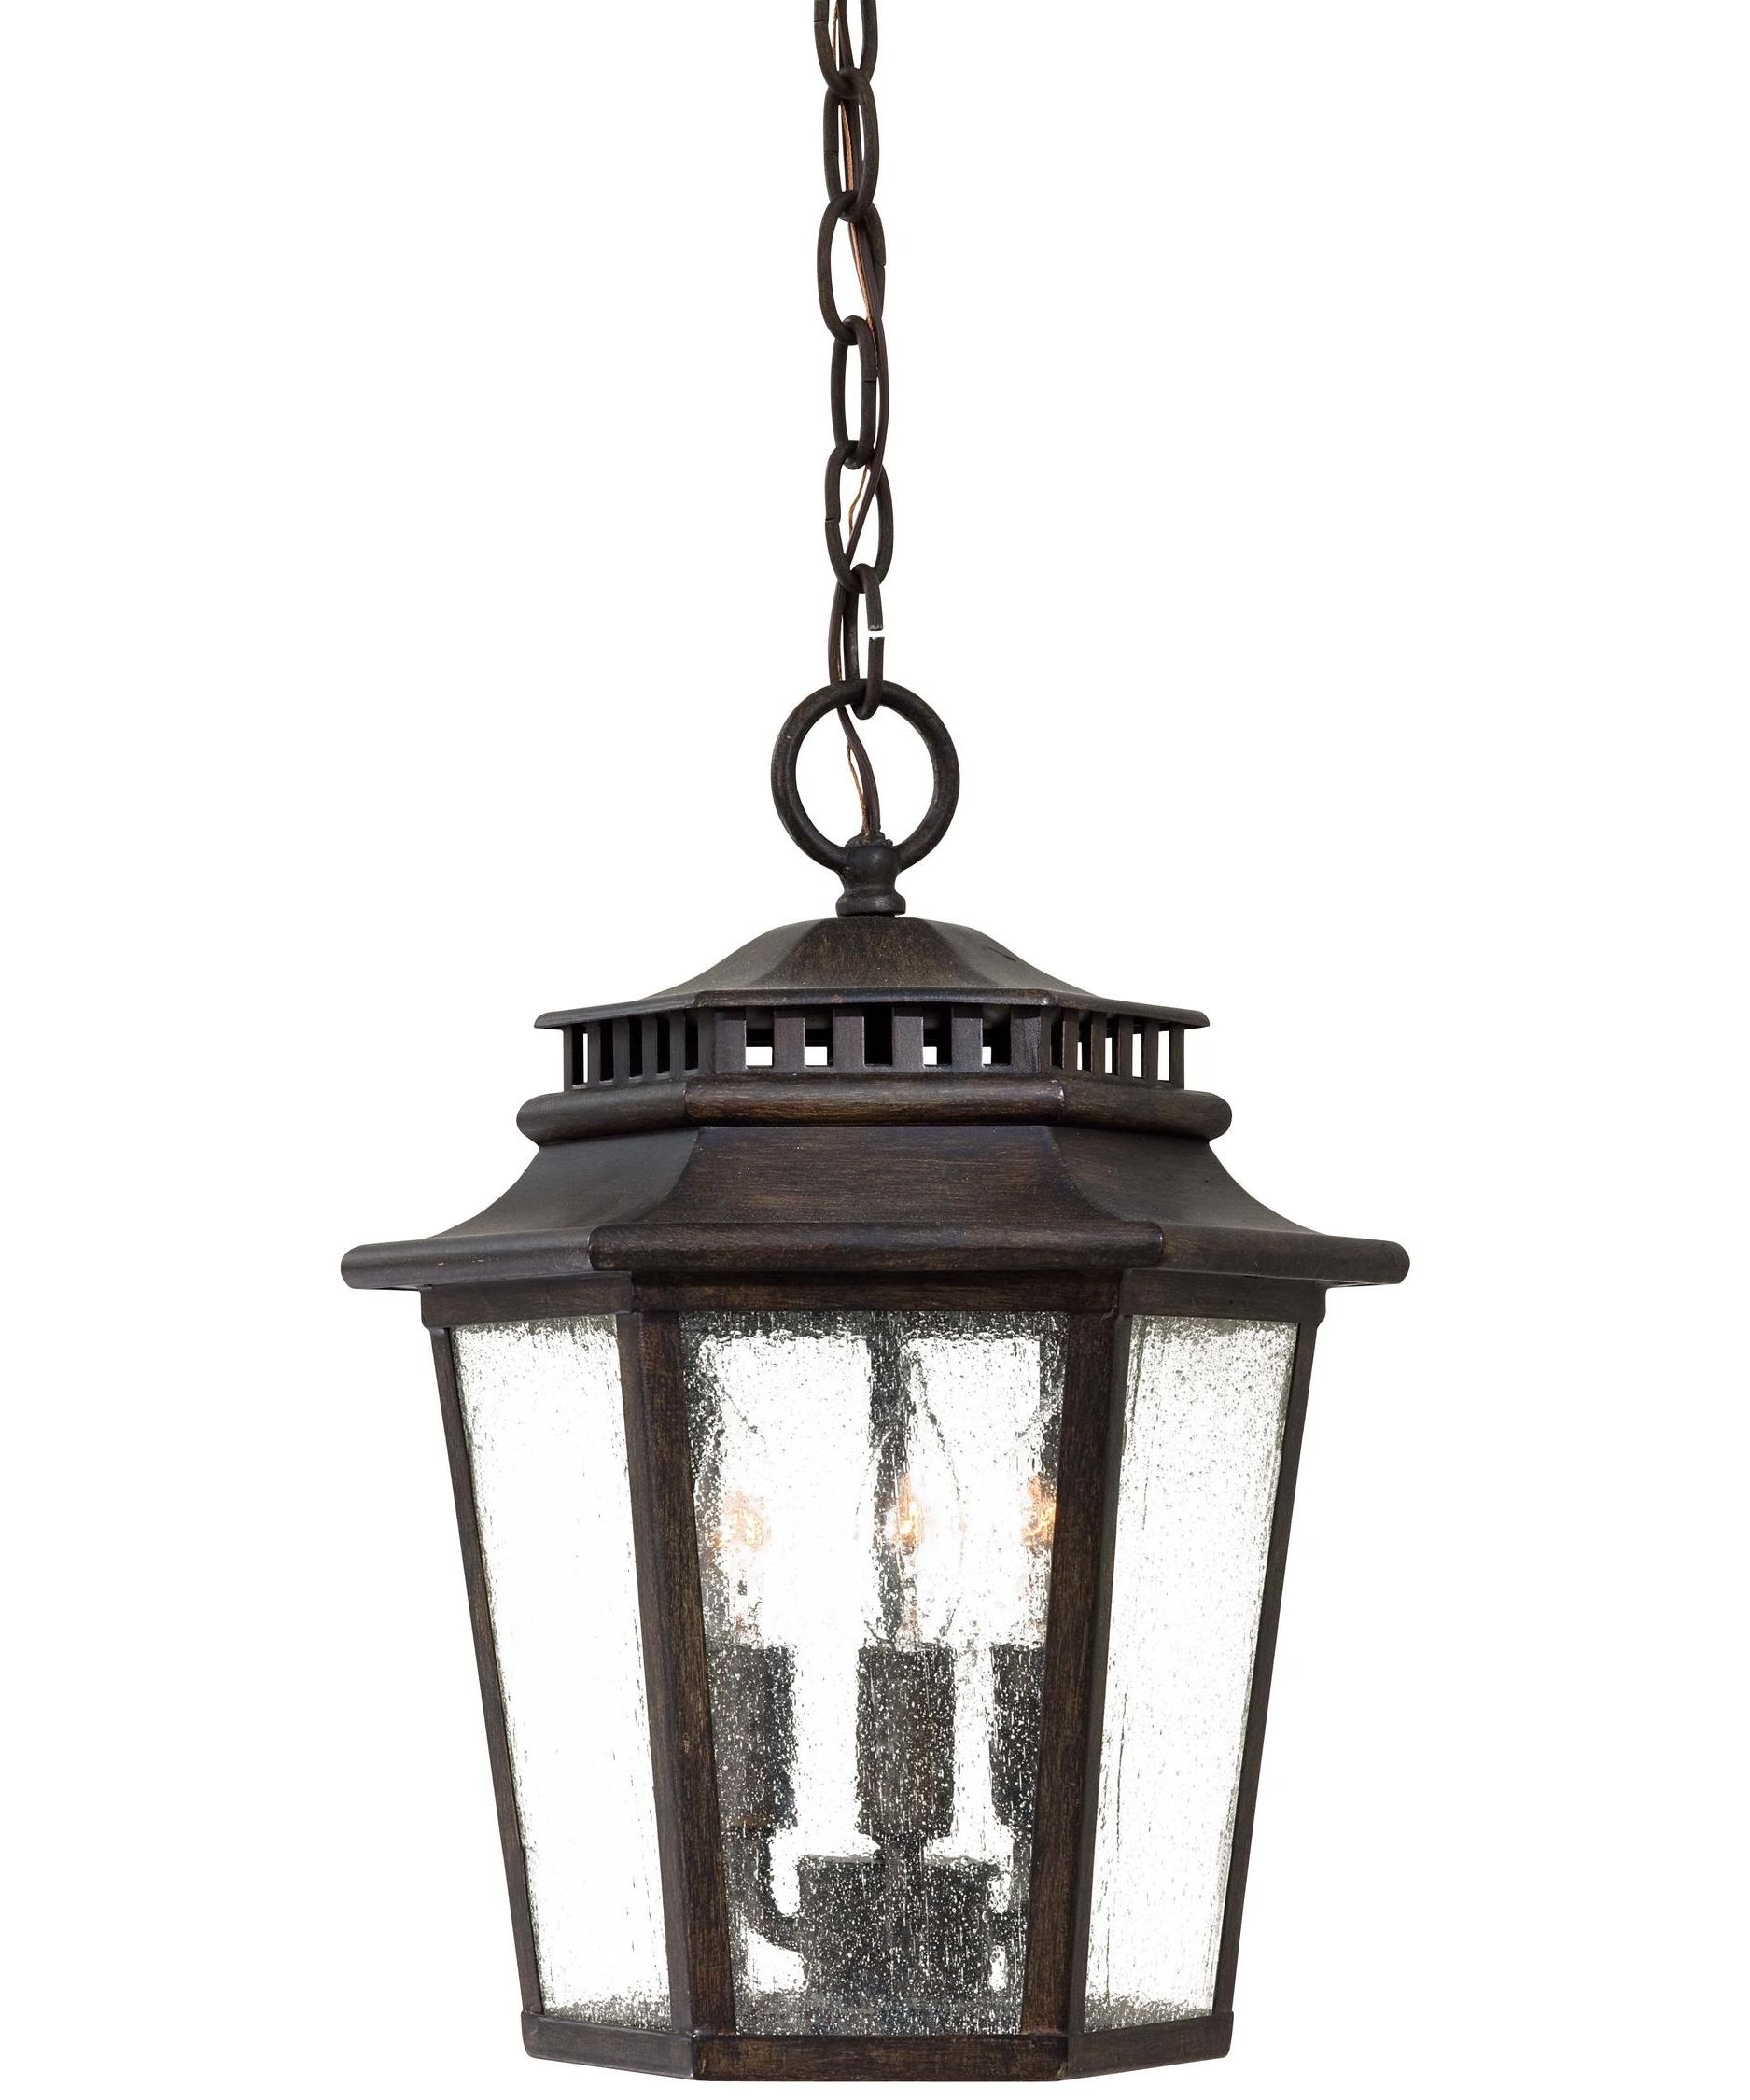 Large Hanging Outdoor Lights – Outdoor Designs Throughout Most Recently Released Large Outdoor Hanging Pendant Lights (View 1 of 20)